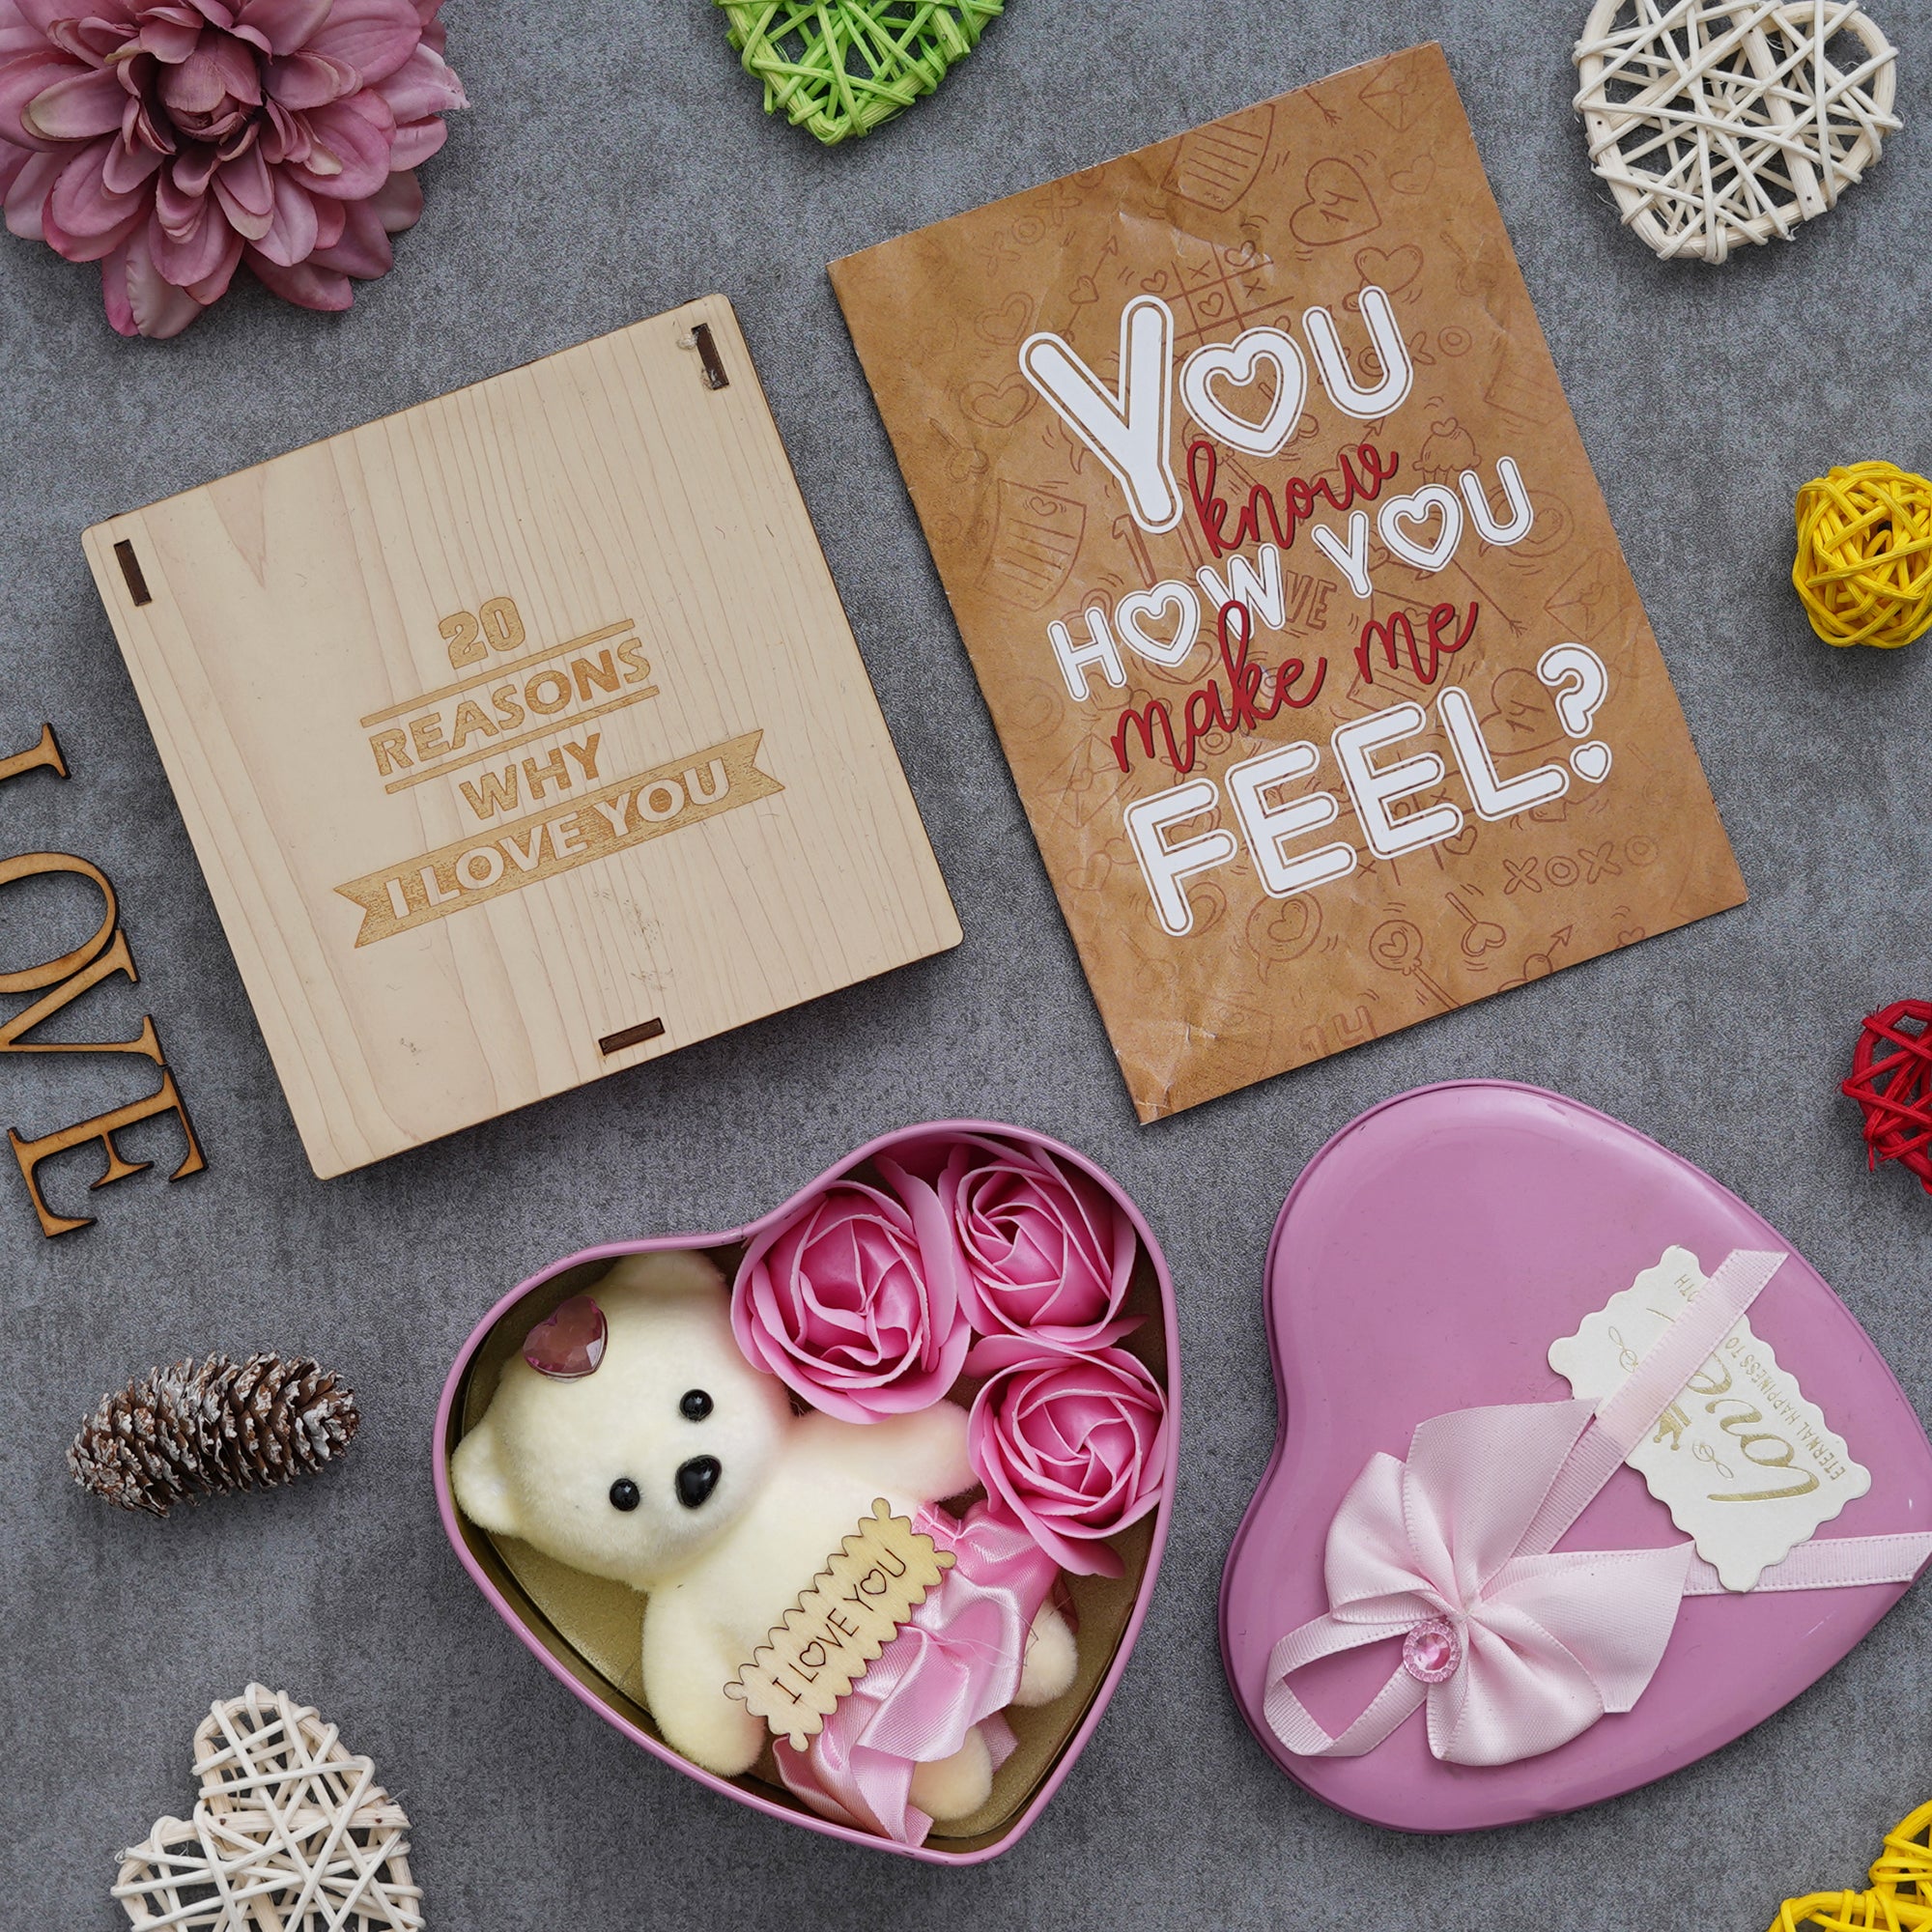 Valentine Combo of Card, "20 Reasons Why I Love You" Printed on Little Hearts Wooden Gift Set, Pink Heart Shaped Gift Box with Teddy and Roses